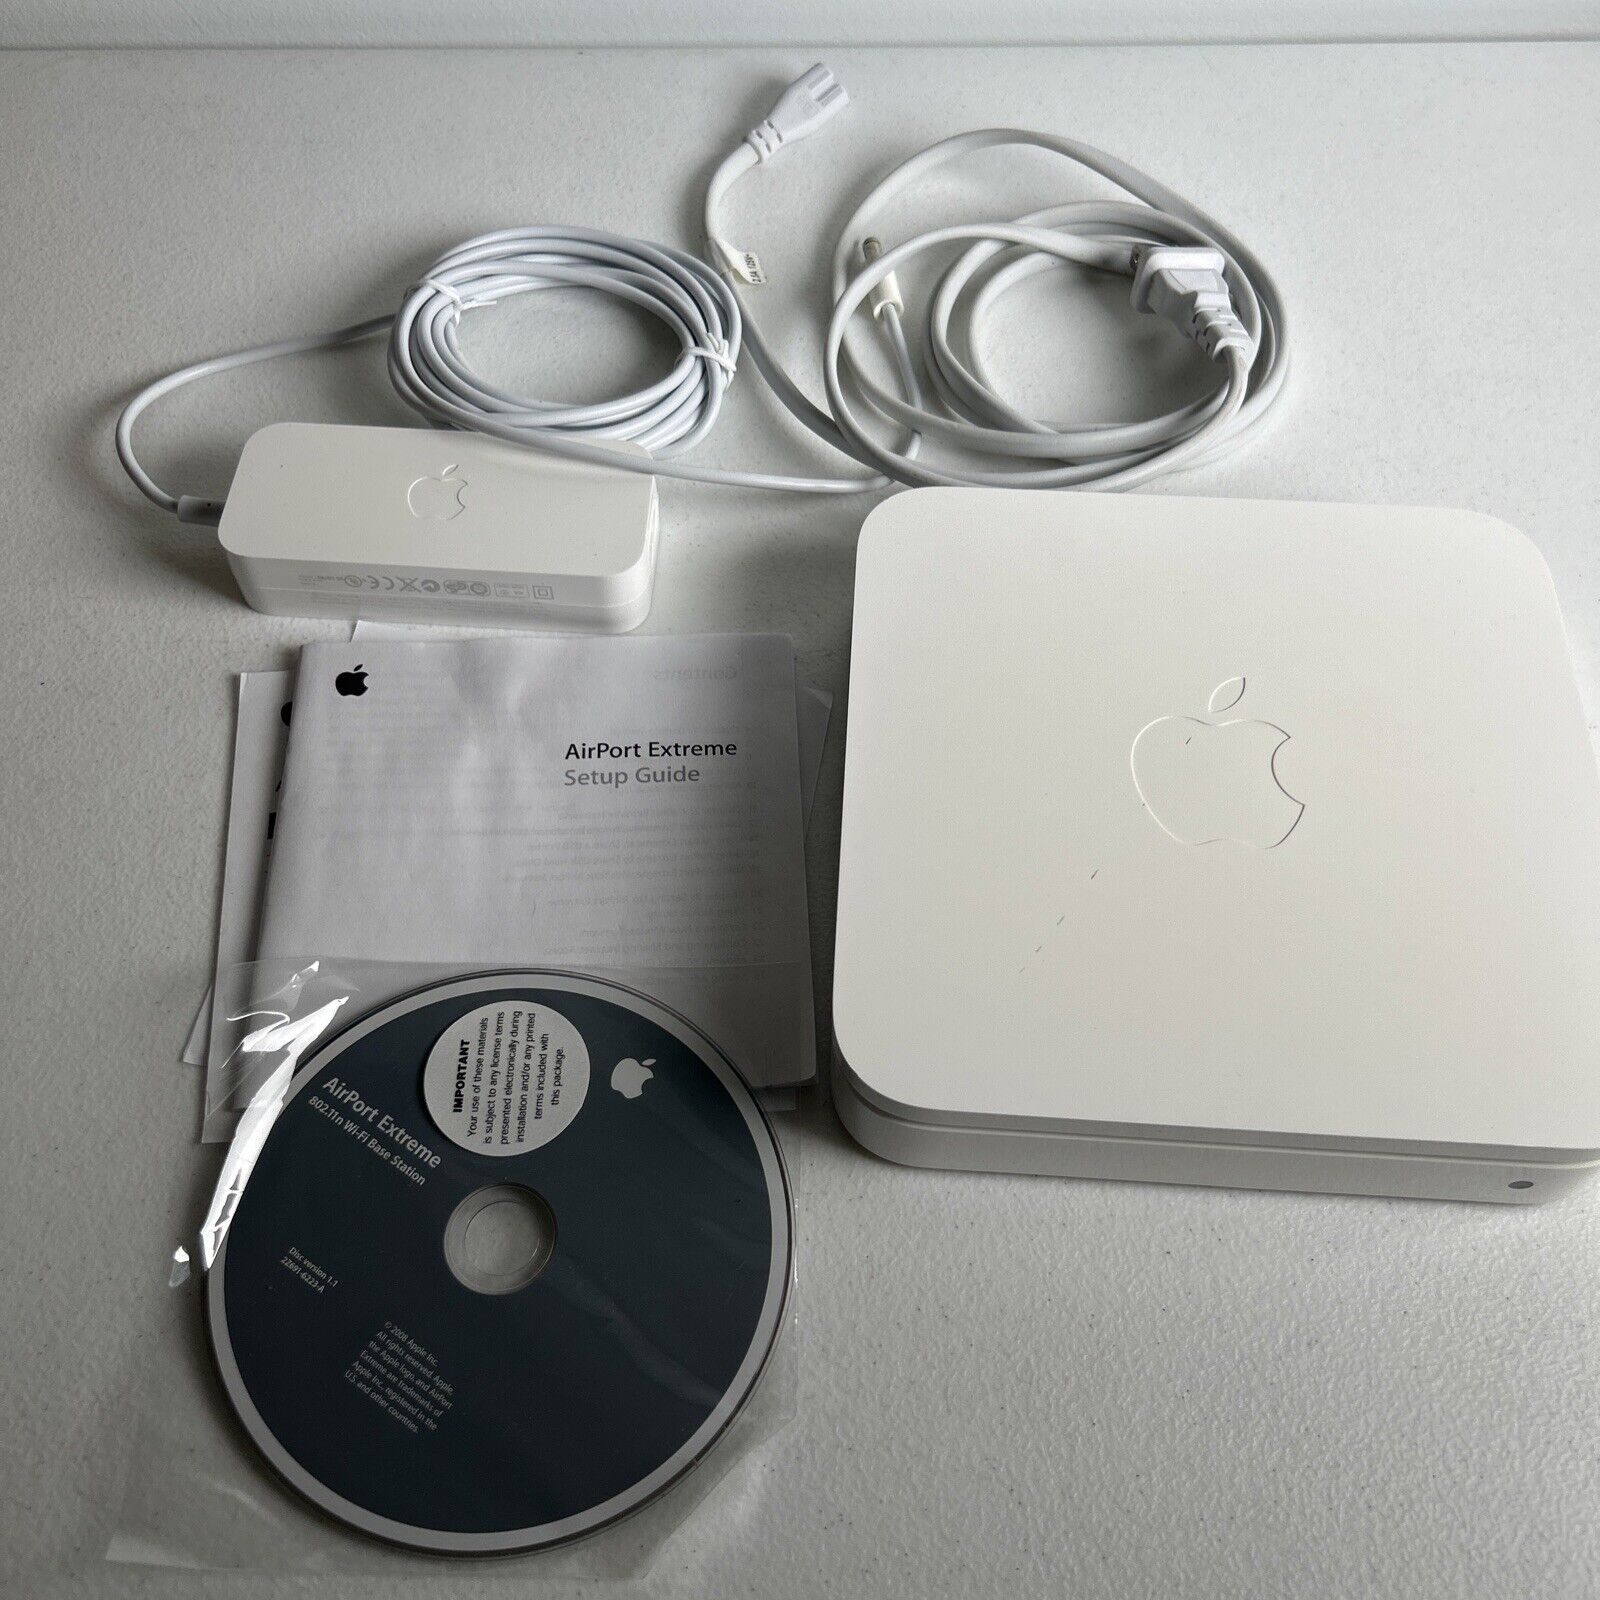 Apple A1143 4-Port Wireless N Router, Manual, Disc- Fast Shipping